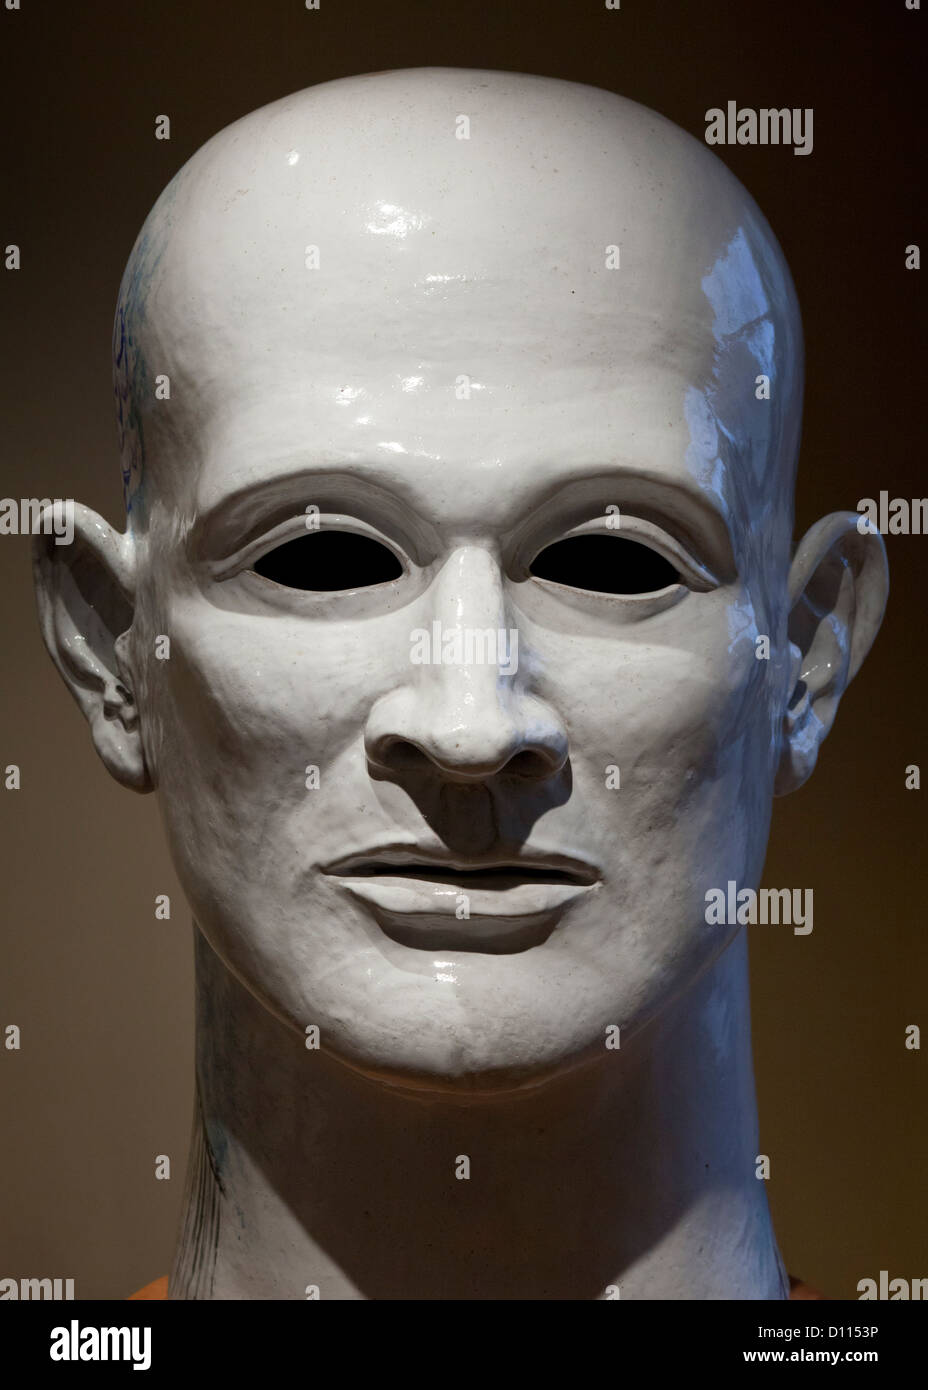 Front view of face sculpture Stock Photo